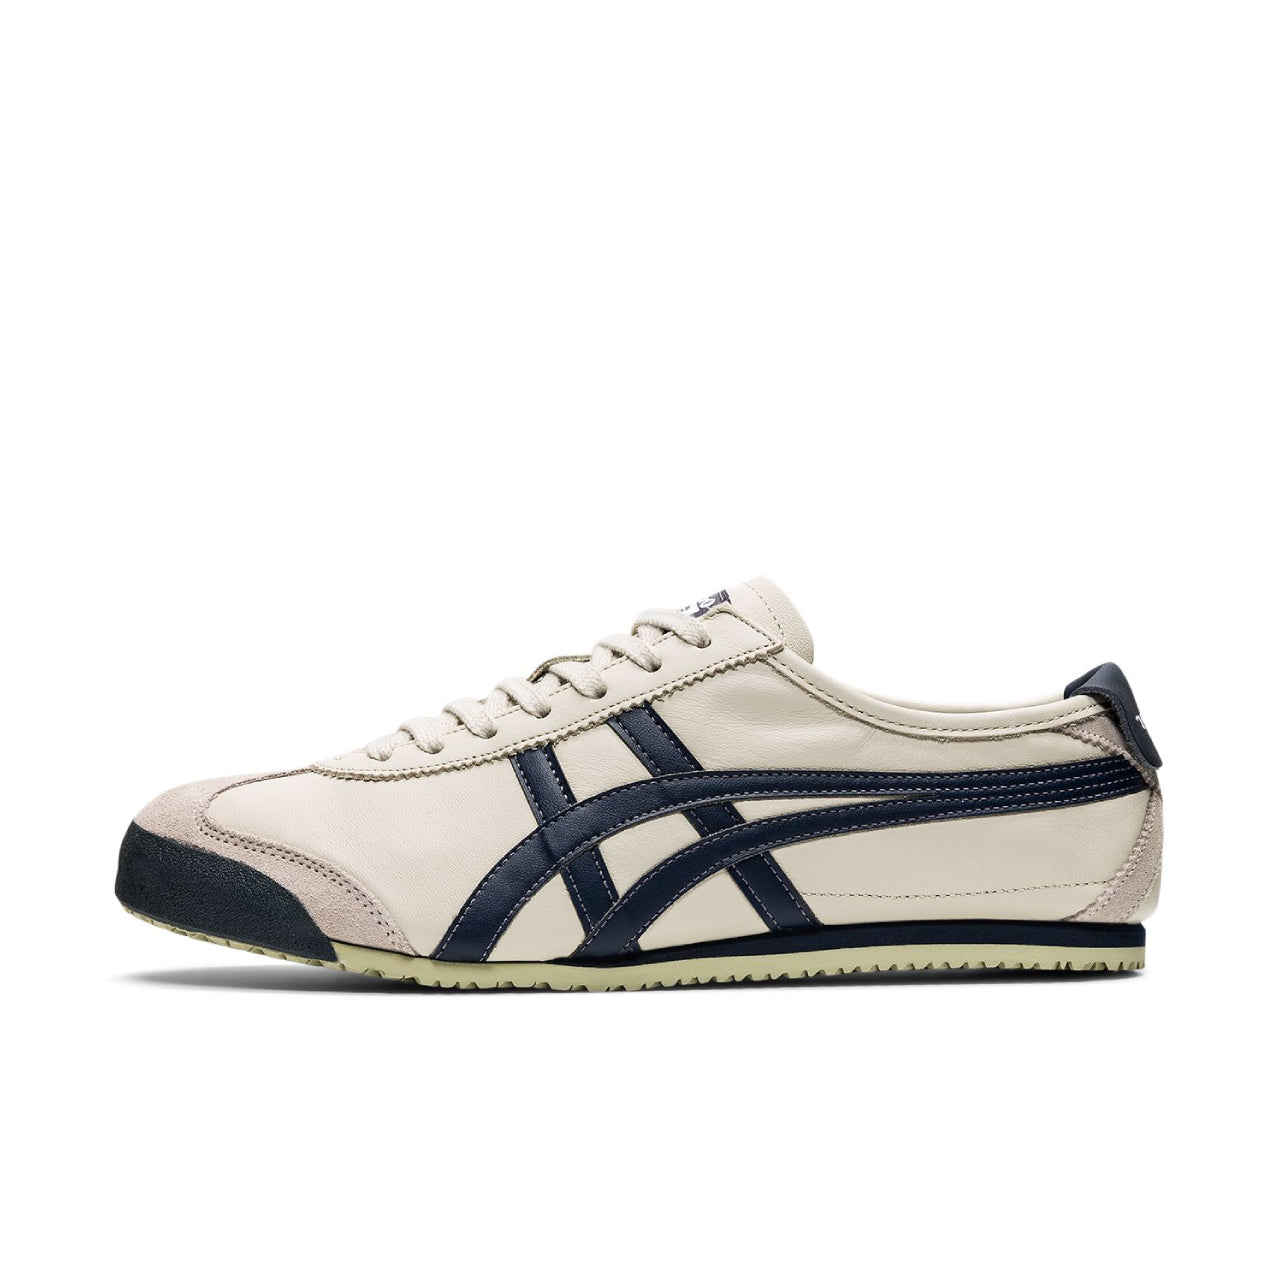 Onitsuka Tiger Mexico 66 Birch Peacoat - 1183C102-200/DL408-1659 - Left